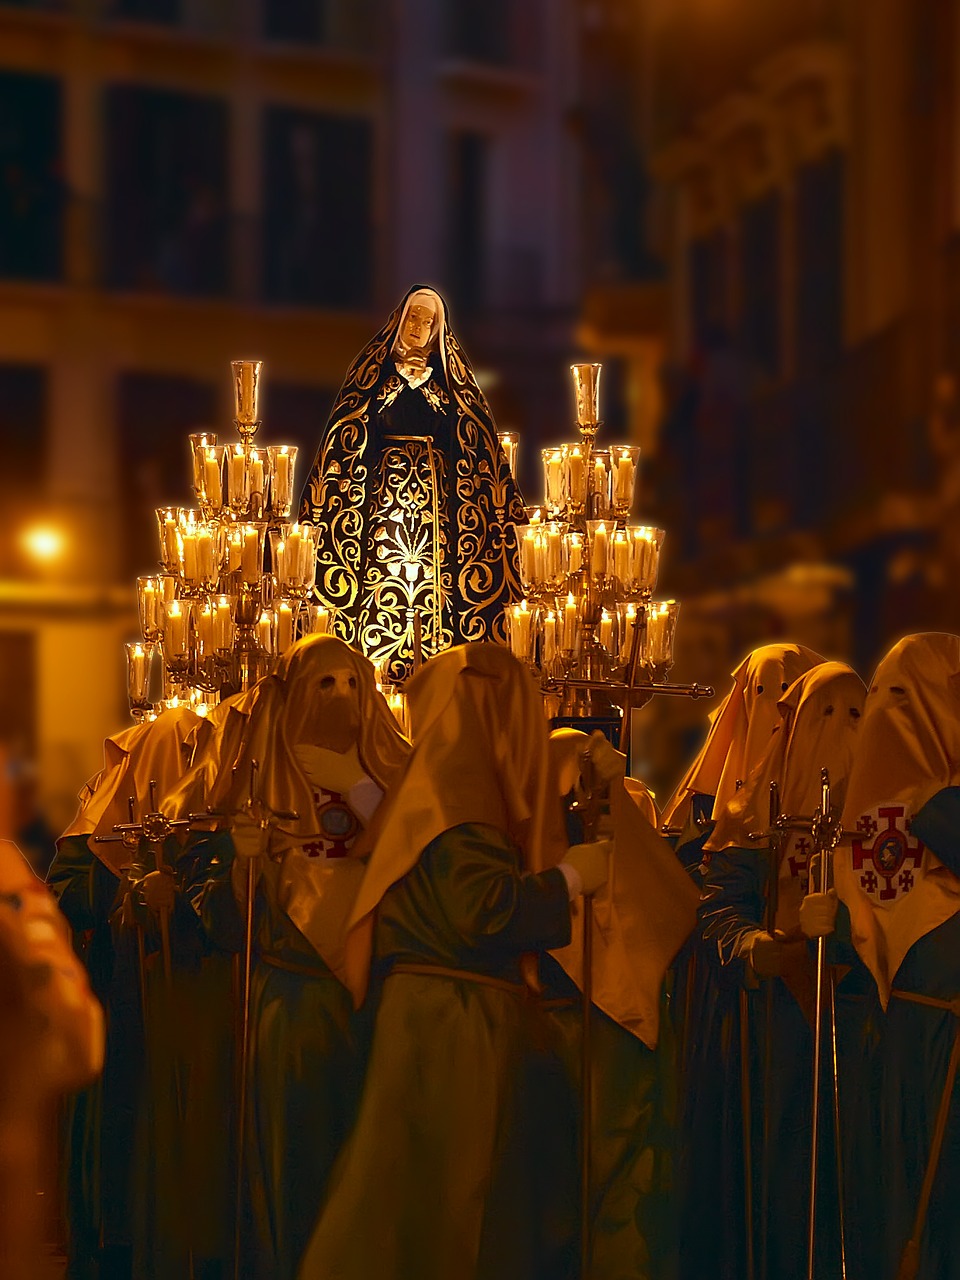 procession blessed virgin mary painful free photo